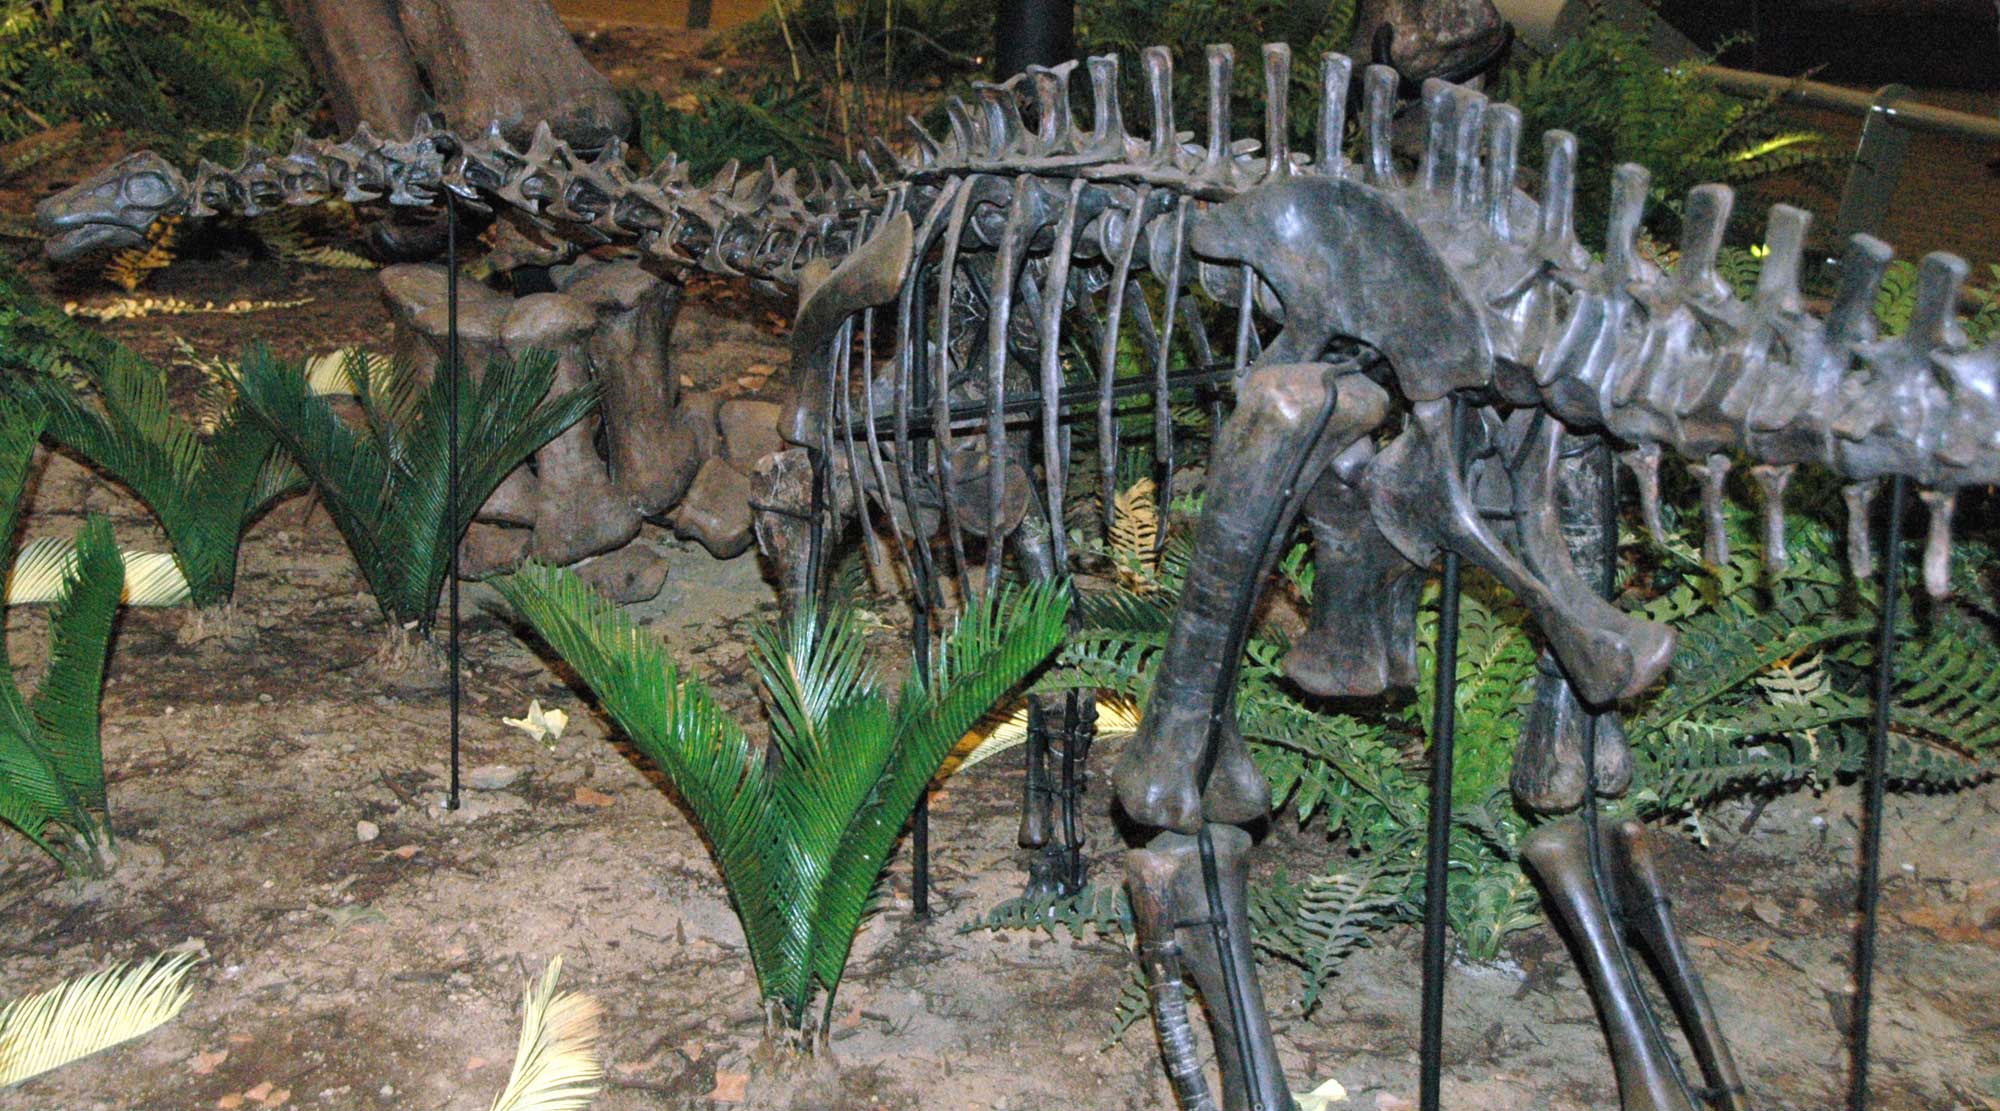 Photograph of a skeleton of a juvenile Apatosaurus louisae, a sauropod from the Morrison Formation of Wyoming, on display in a museum. The photo shows a long-necked dinosaur skeleton standing on four legs. The dinosaur is small, as indicated by its statue relative to cycads that are also part of the museum display.